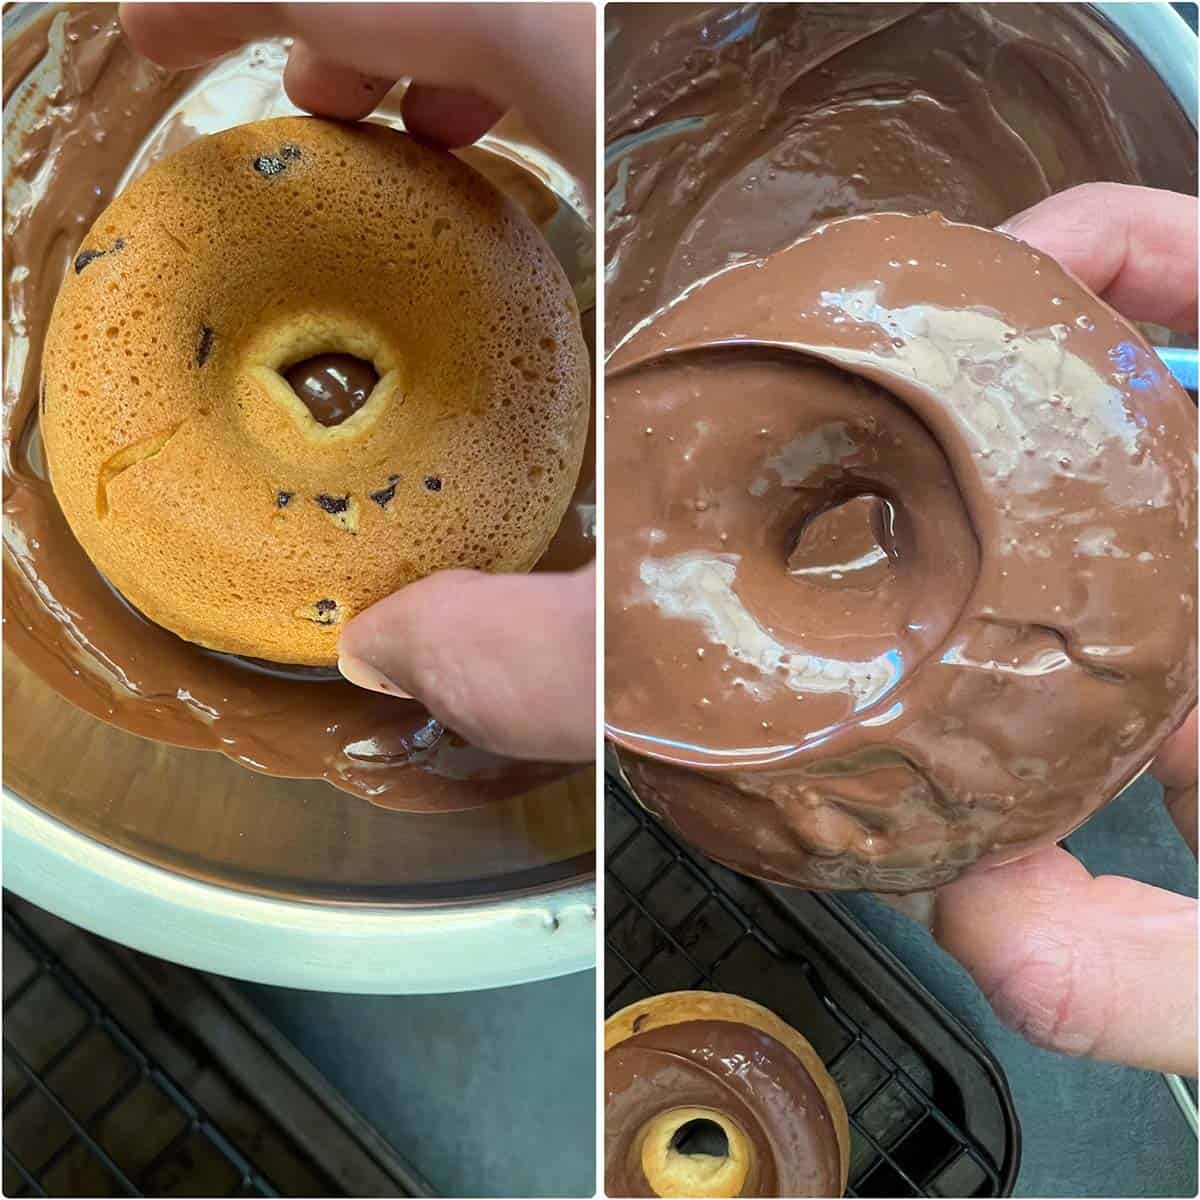 2 panel photo showing the dipping of donuts in chocolate glaze.